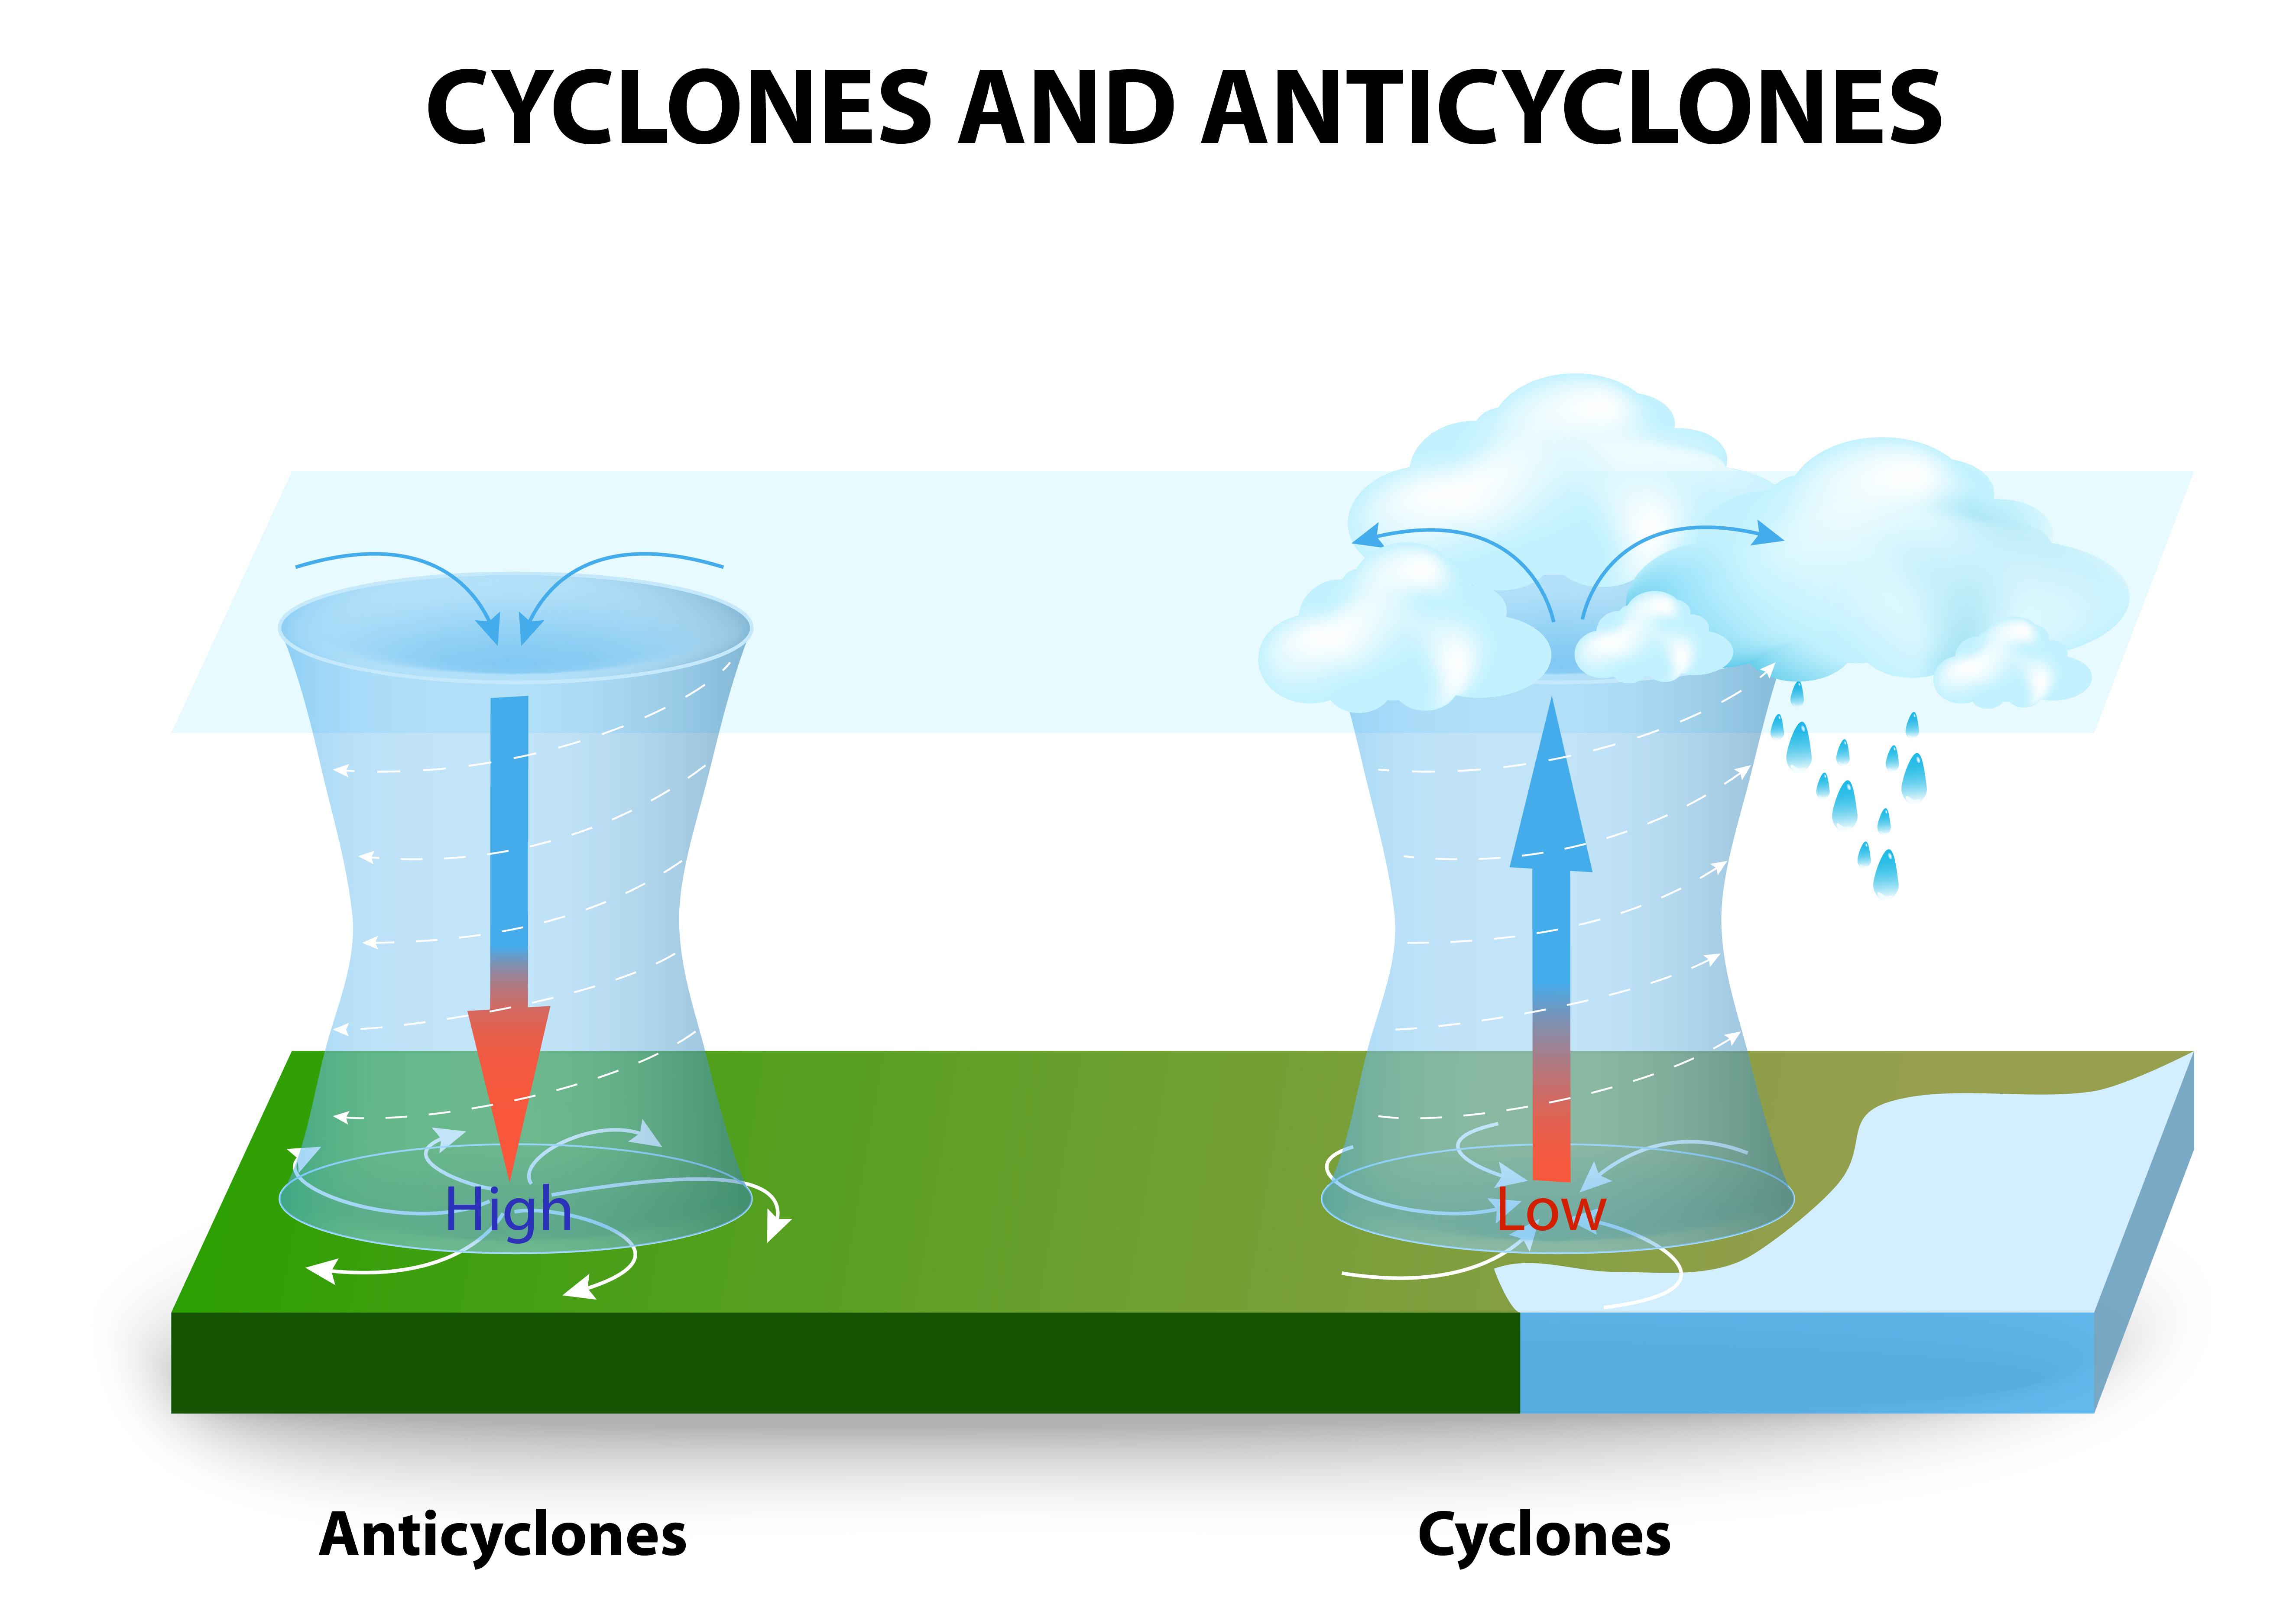 Cyclone and Anticyclone